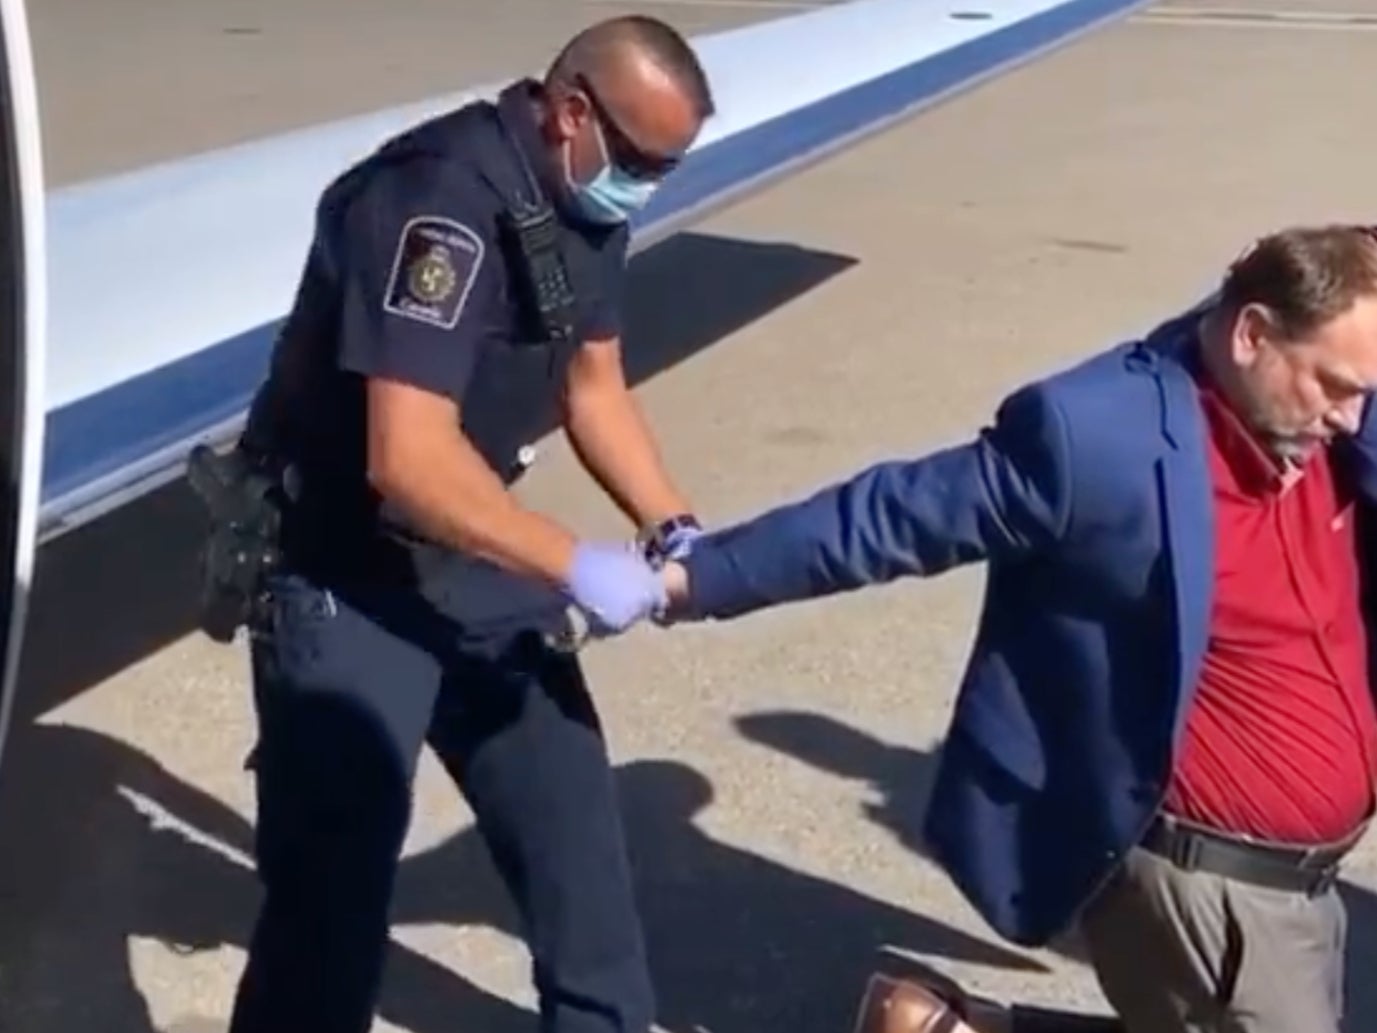 Canadian MAGA Pastor Artur Pawlowski was arrested on the tarmac of Calgary International Airport as he returned home after spreading Covid lies in the US